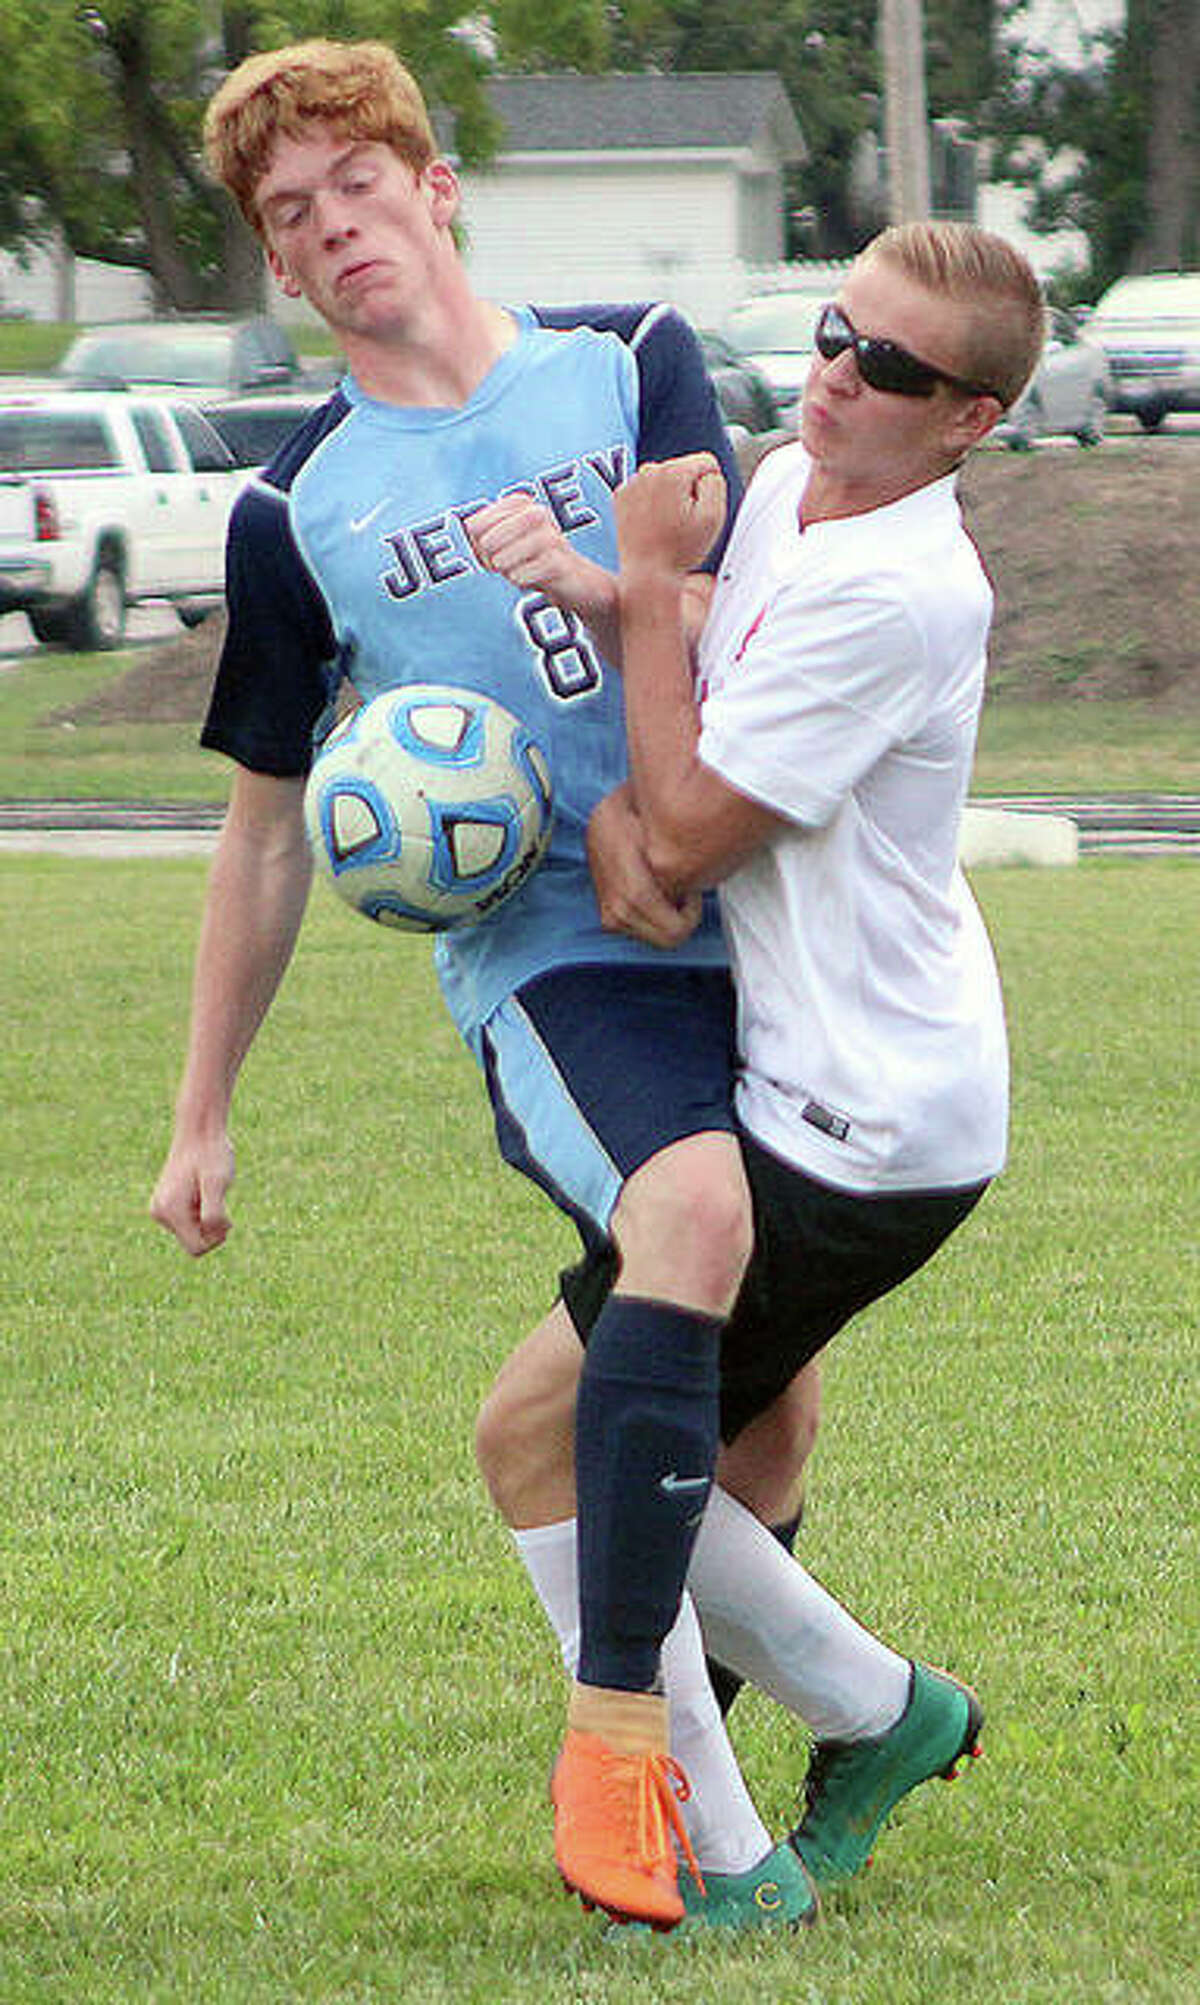 Jacob Schnefke of Staunton, right, collides with Jersey’s Zane Longley Monday in the boys prep soccer season opener in Jerseyville.